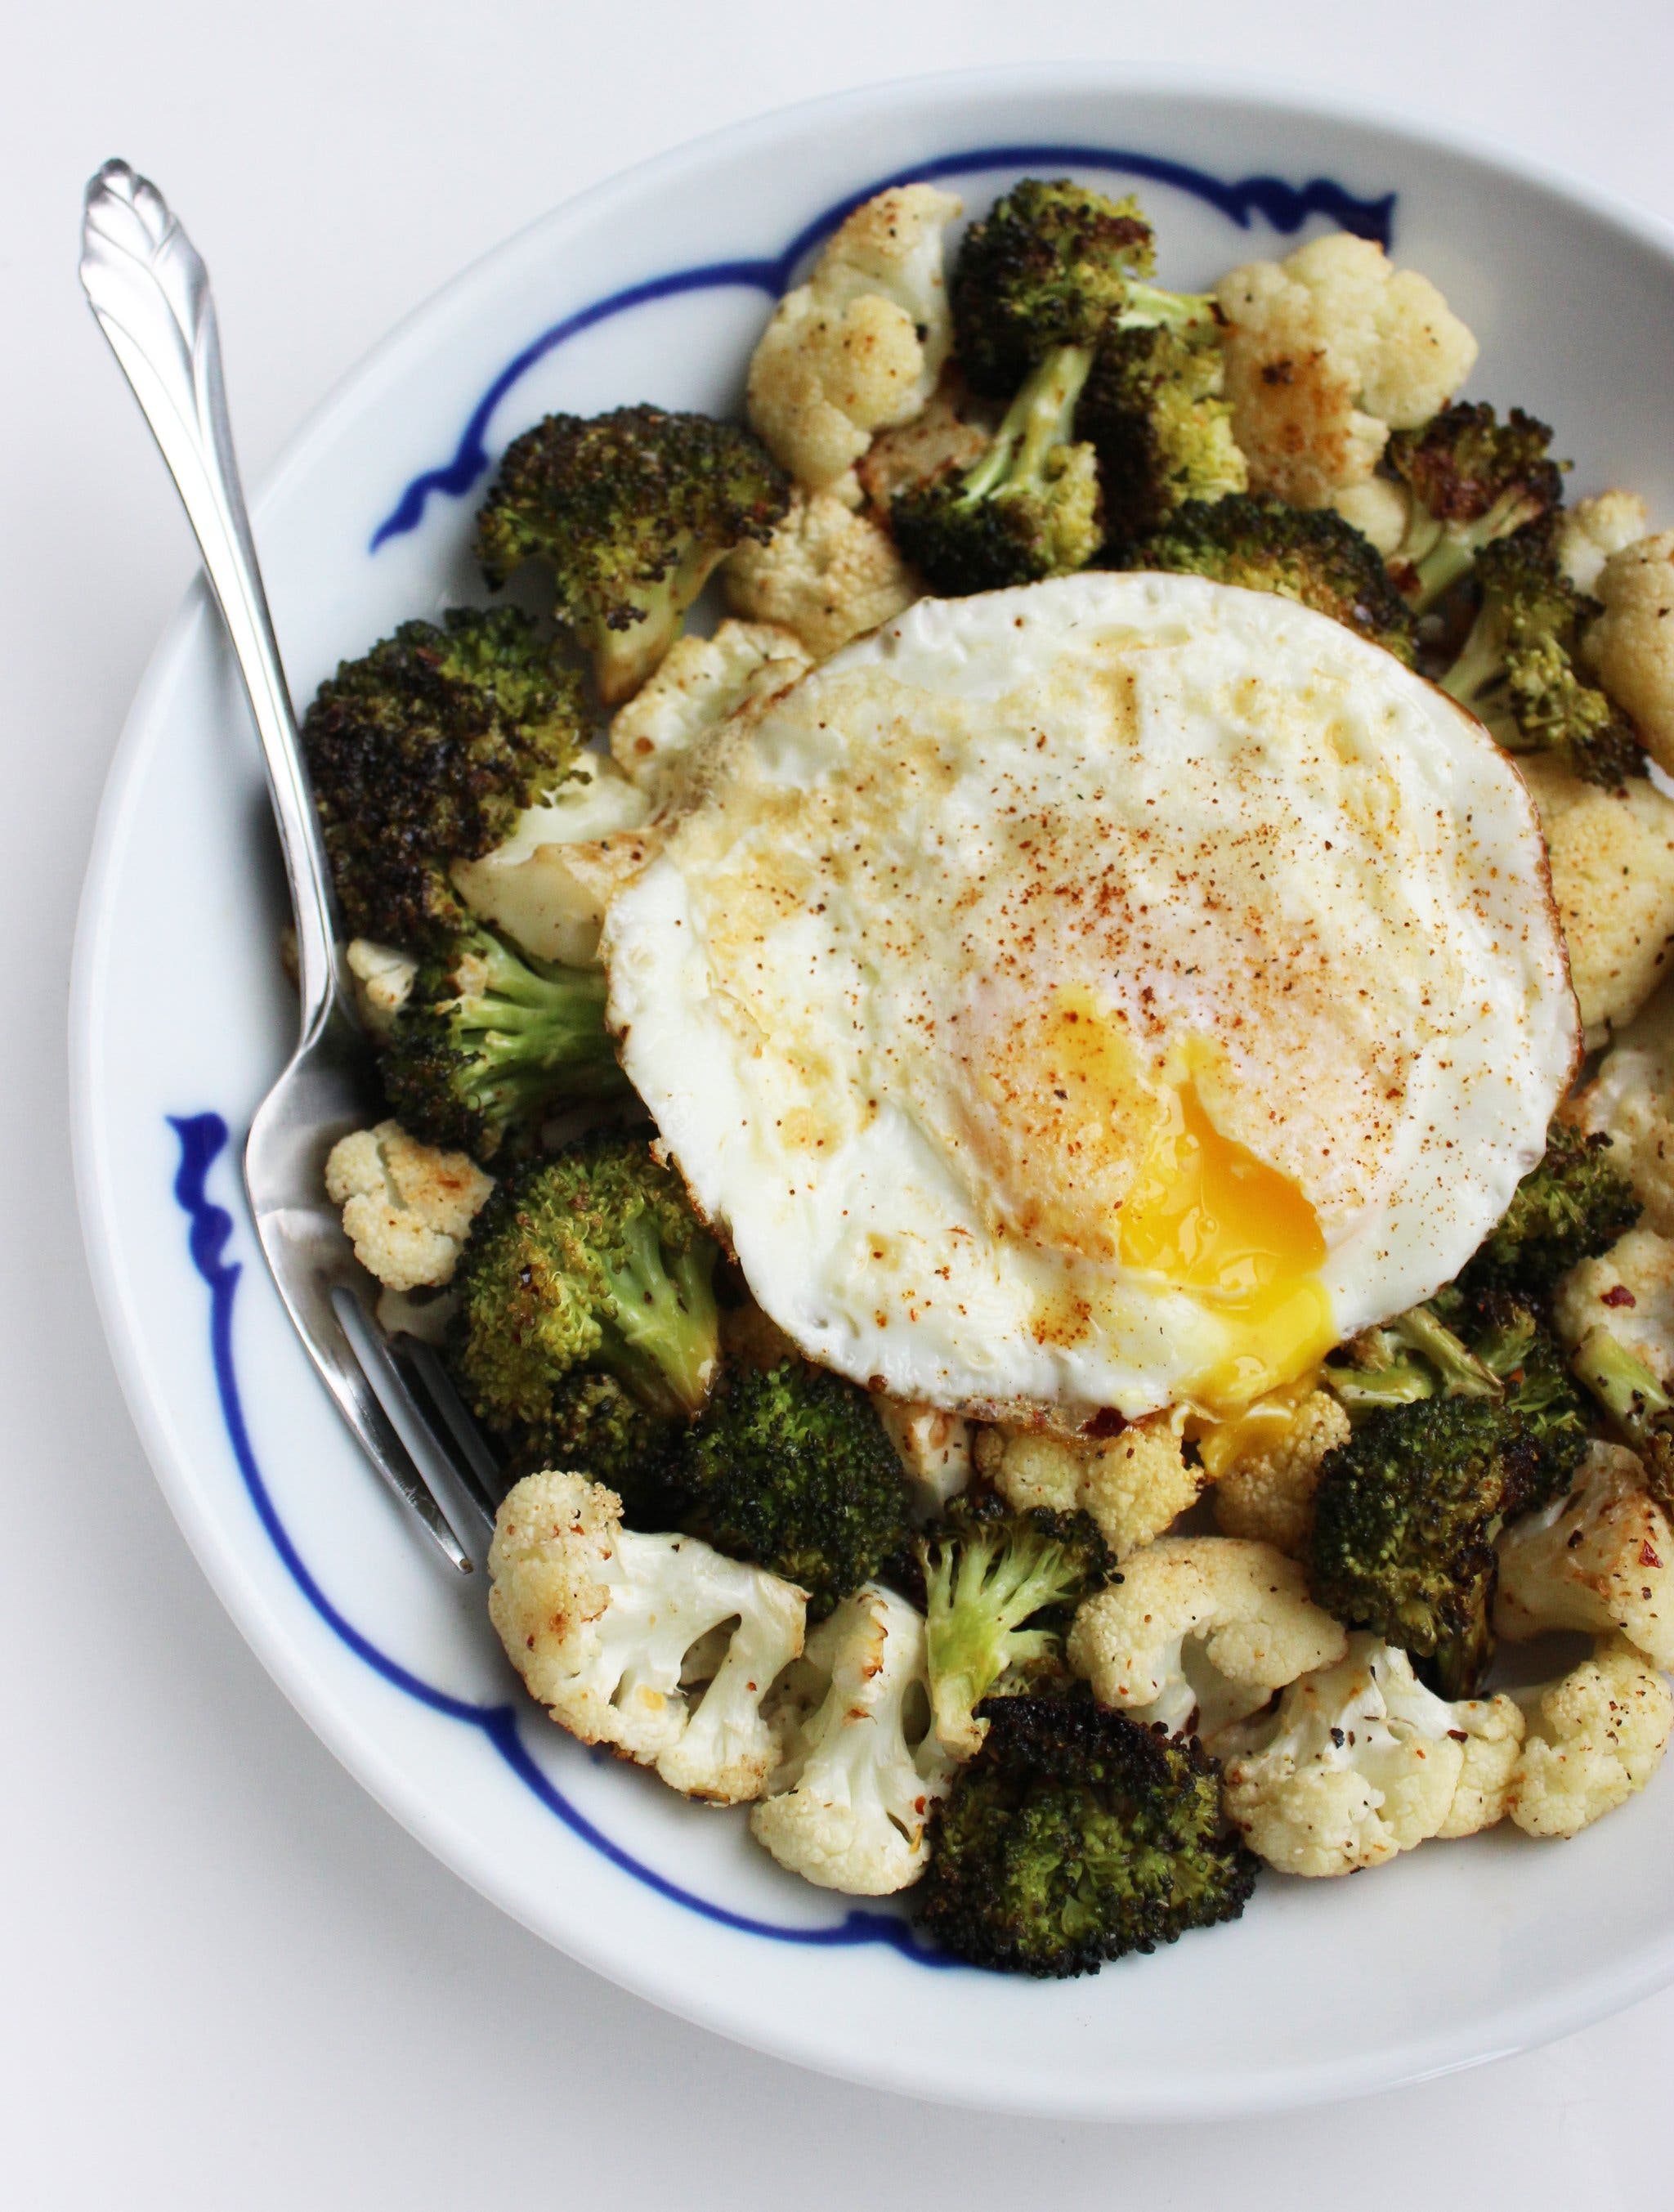 The 10 best breakfast recipes that make you lose weight